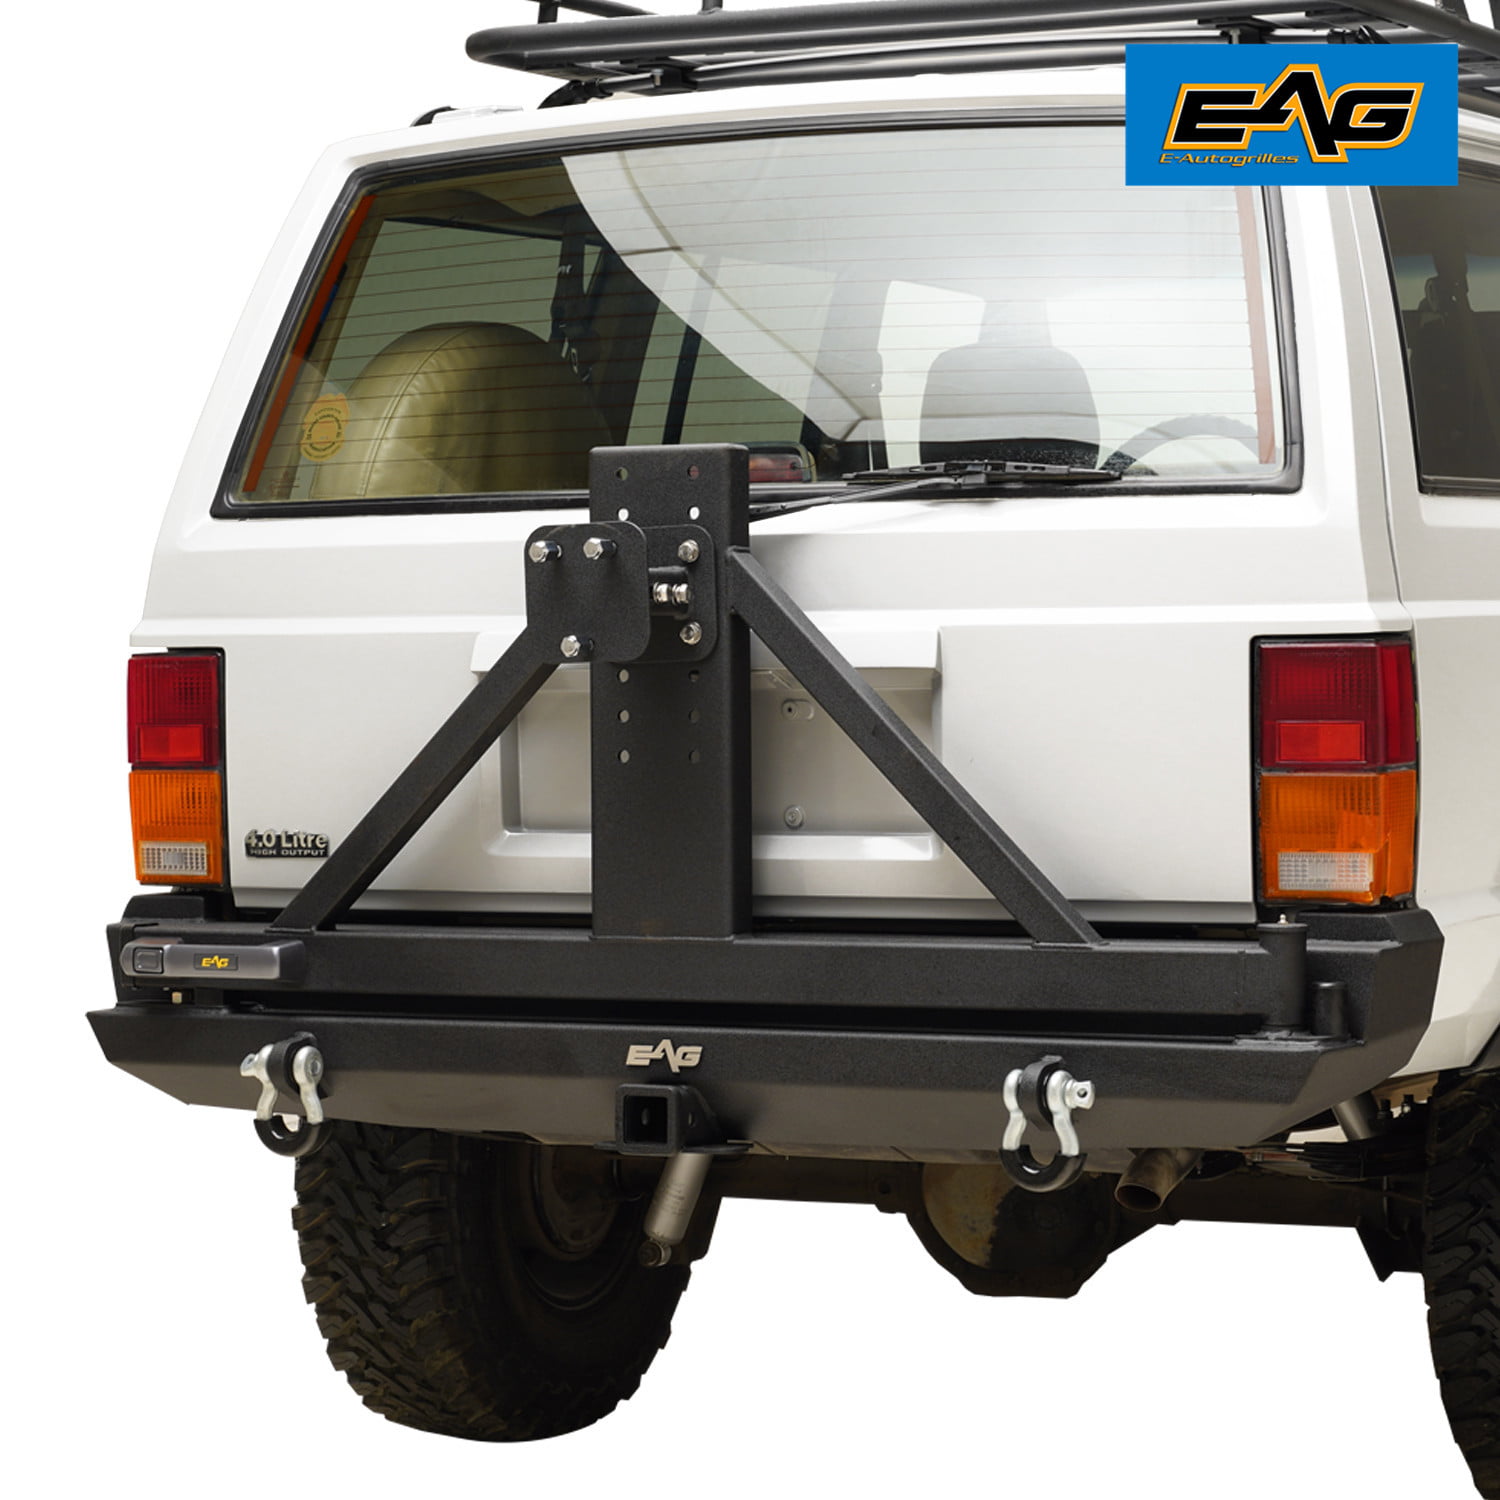 EAG Steel Rear Bumper with Tire Carrier Fit for 19842001